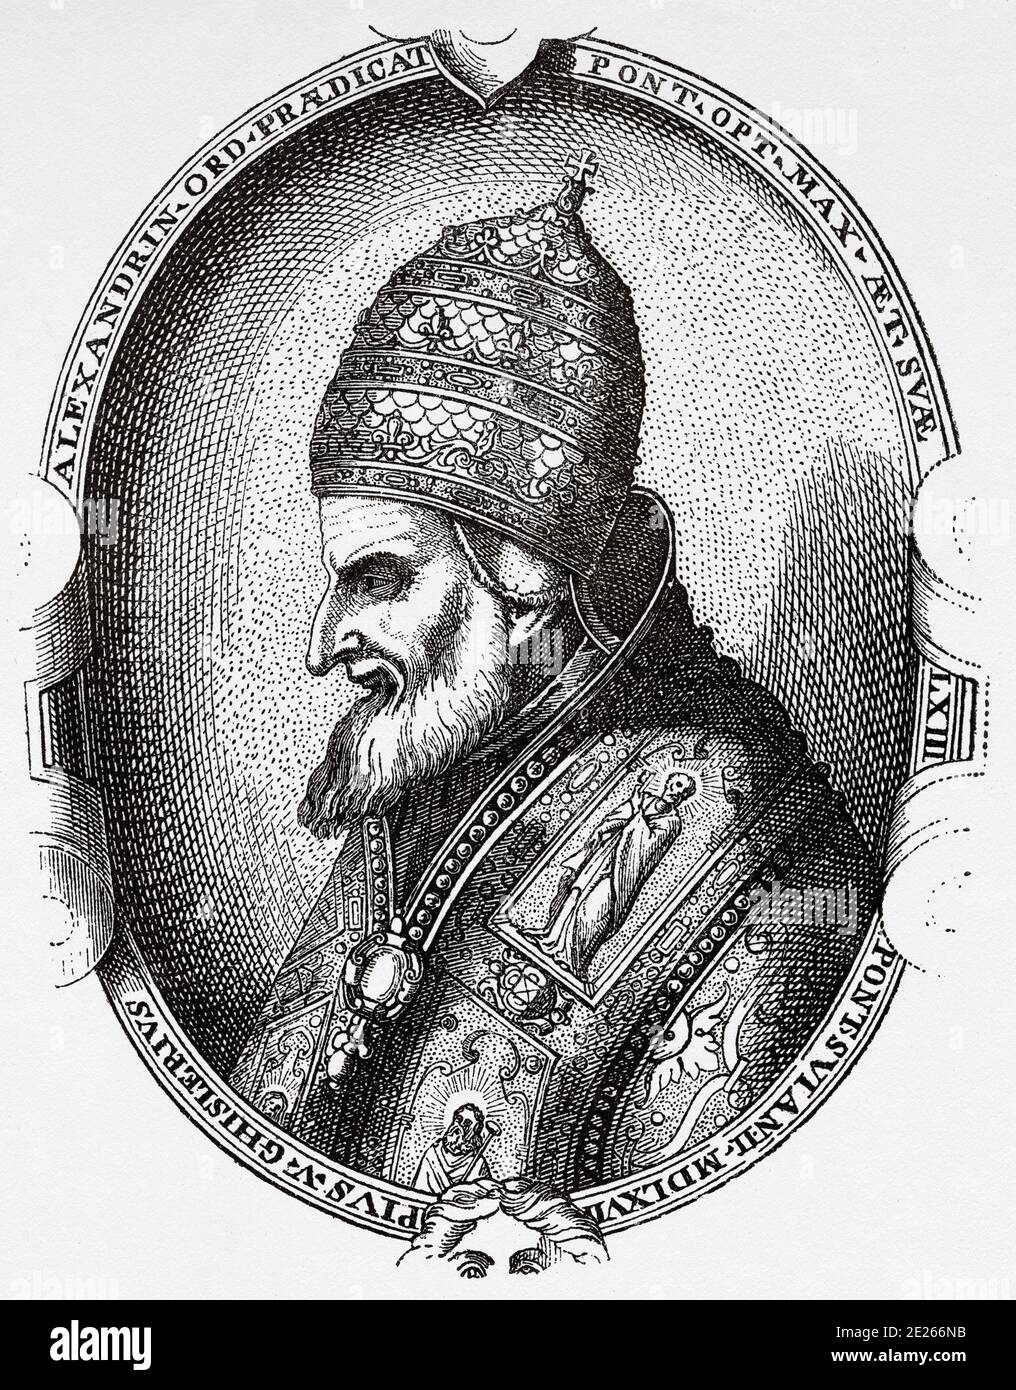 Portrait of Pope Pius V (Bosco, January 17, 1504-Rome, May 1, 1572), born Antonio Michele Ghislieri, was the 225 pope of the Catholic Church and lord of the Papal States between 1566 and 1572. Dominican friar and general commissioner of the Roman Inquisition. He was canonized by Pope Clement XI in 1712. History of Philip II of Spain. Old engraving published in Historia de Felipe II by H. Forneron, in 1884 Stock Photo